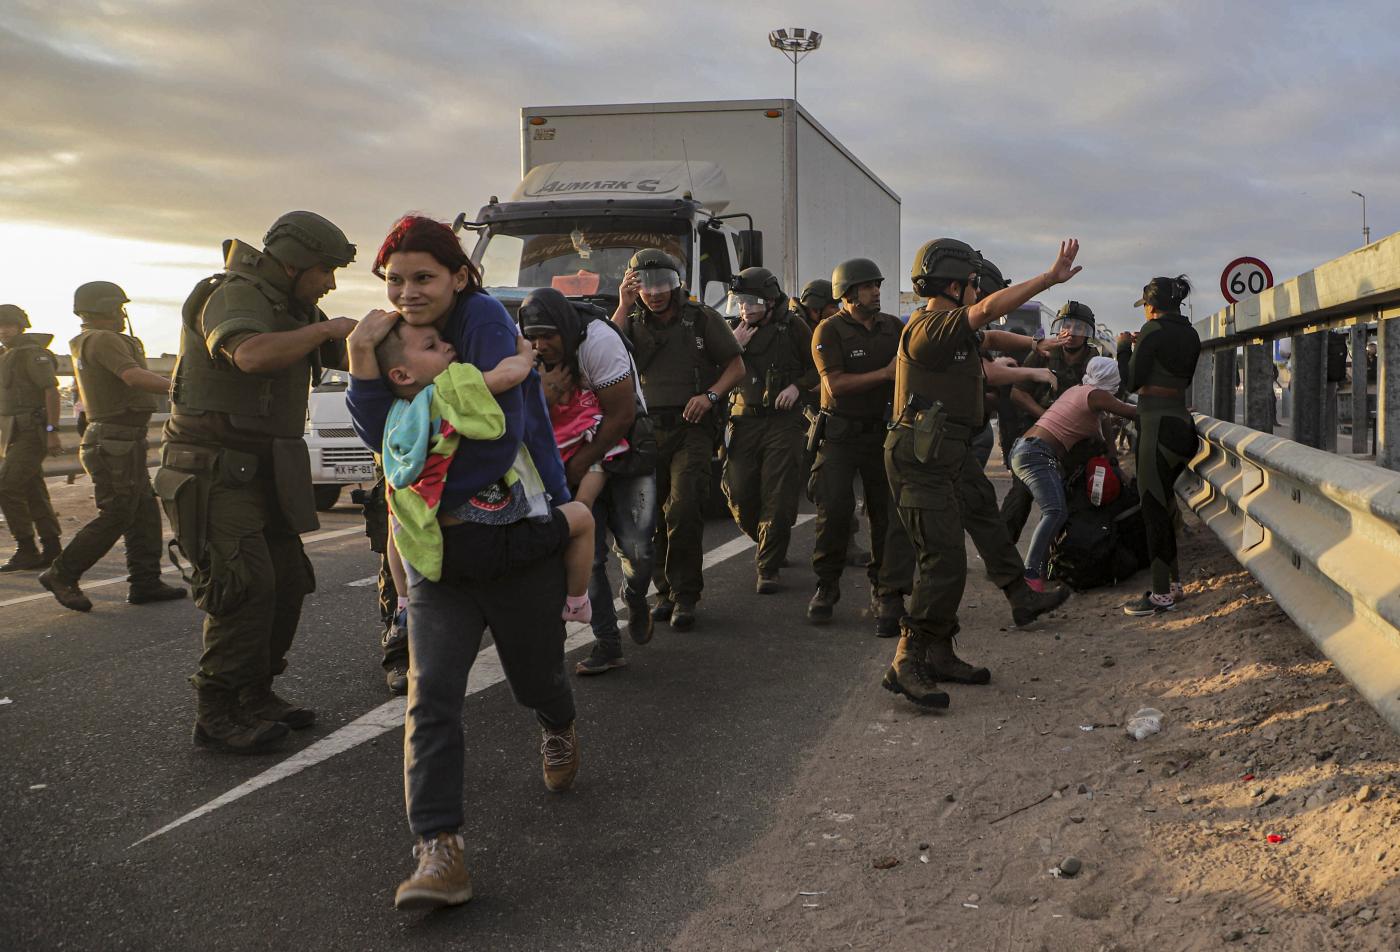 Migrants who blocked the highway on the Chile-Peru border are dispersed by Chilean Police, near Arica, Chile, Tuesday, May 2, 2023. A migration crisis at the border between Chile and Peru has intensified as migrants who claim they want to go home remained stranded, unable to enter Peru. (AP Photo/Agustin Mercado)

Associated Press/LaPresse
Only Italy and Spain